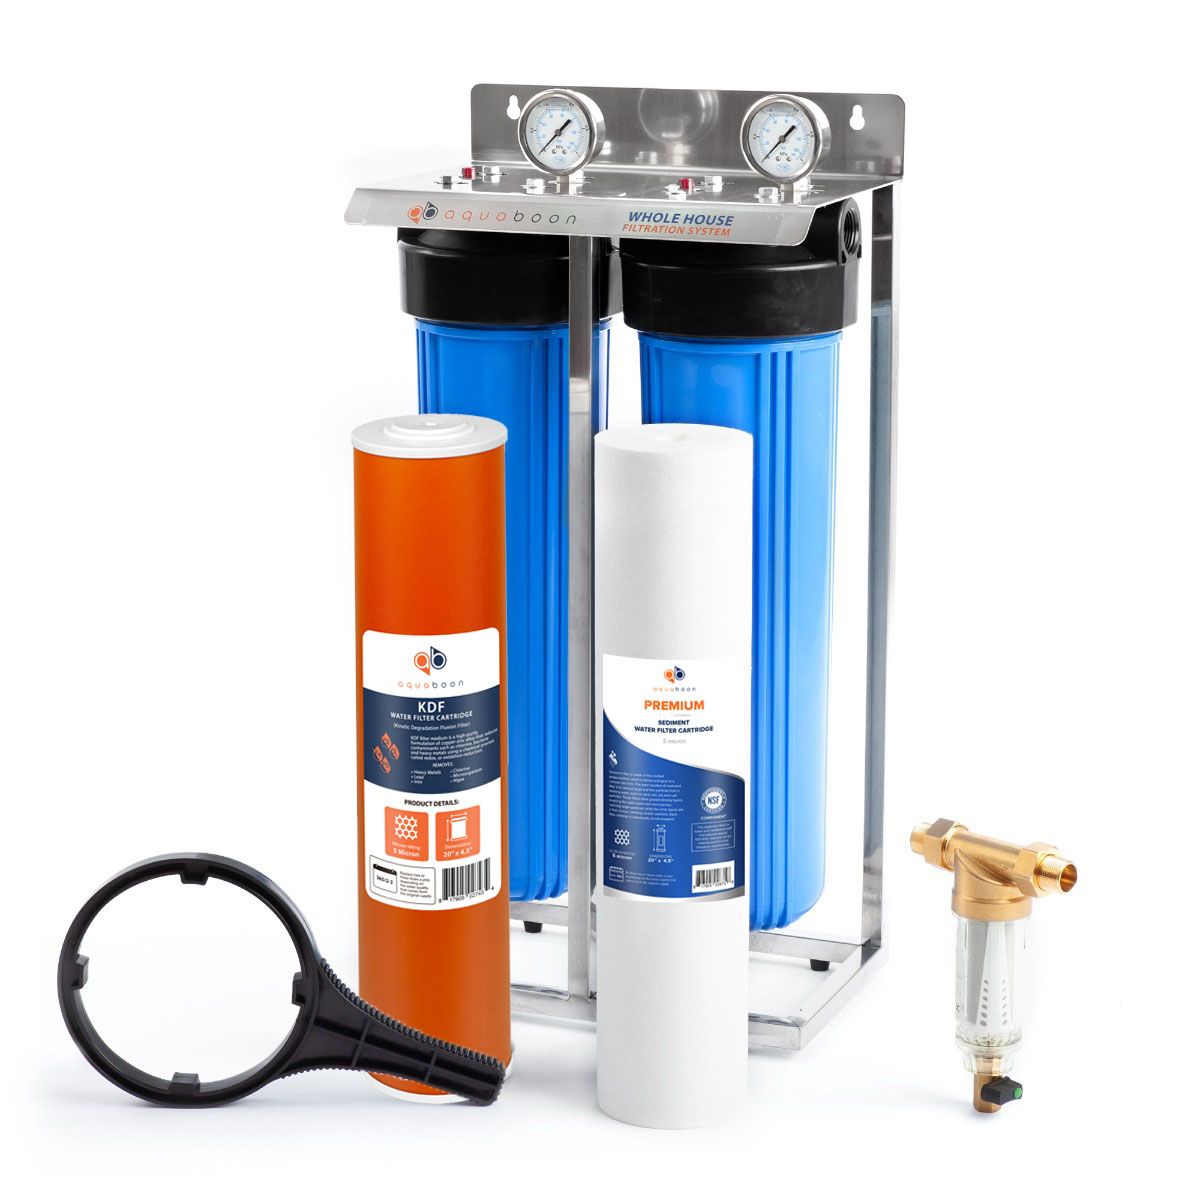 2-Stage 20" Whole House Water Filtration System by Aquaboon AB-2WHPG20BB-1K20BB-1S20BB5M